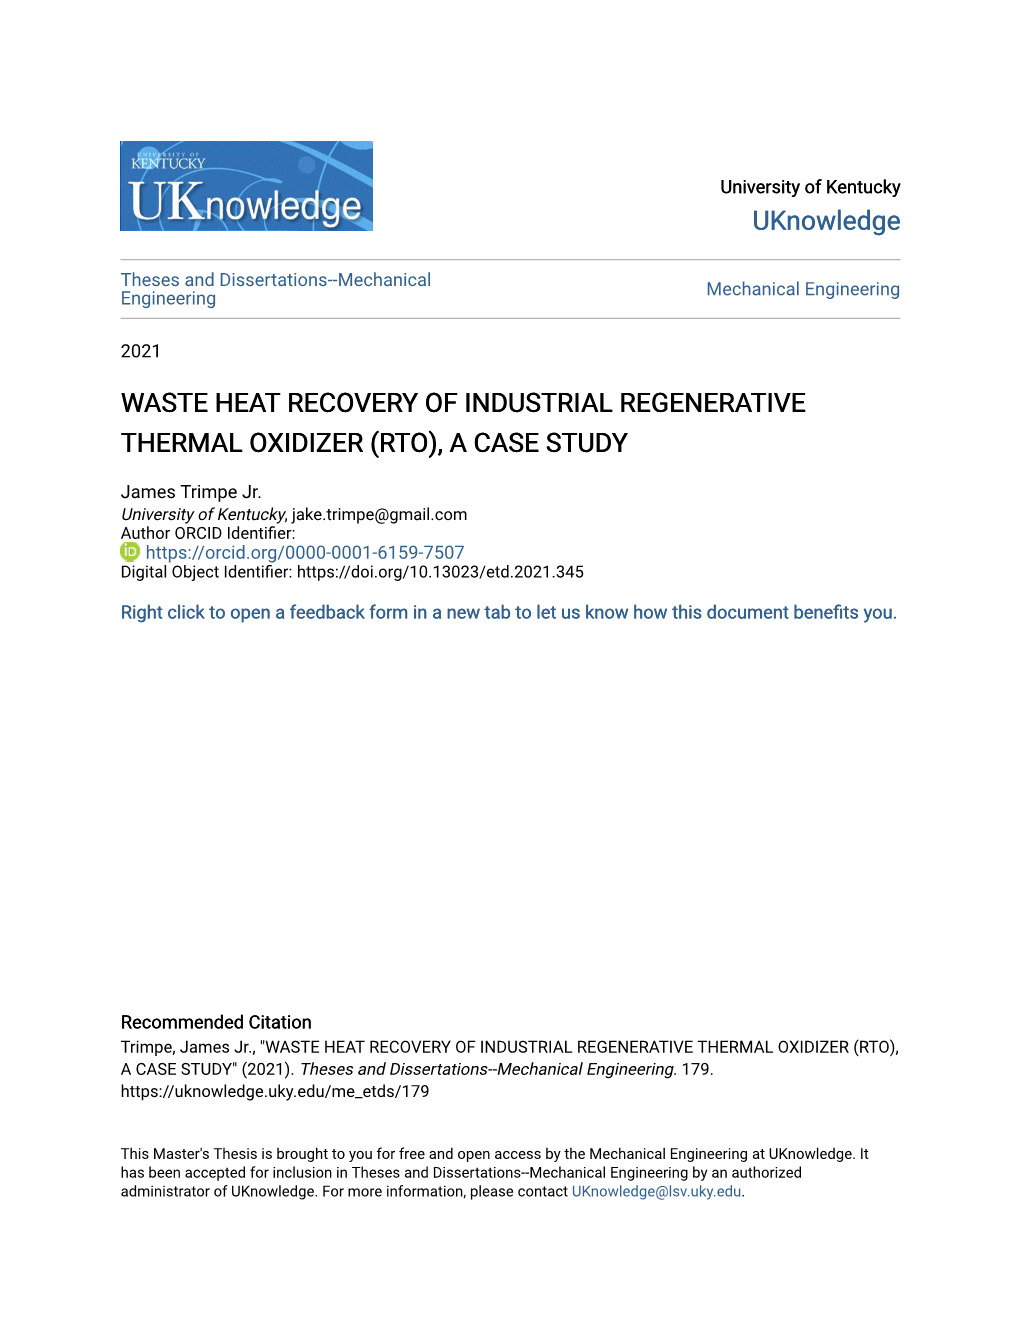 Waste Heat Recovery of Industrial Regenerative Thermal Oxidizer (Rto), a Case Study